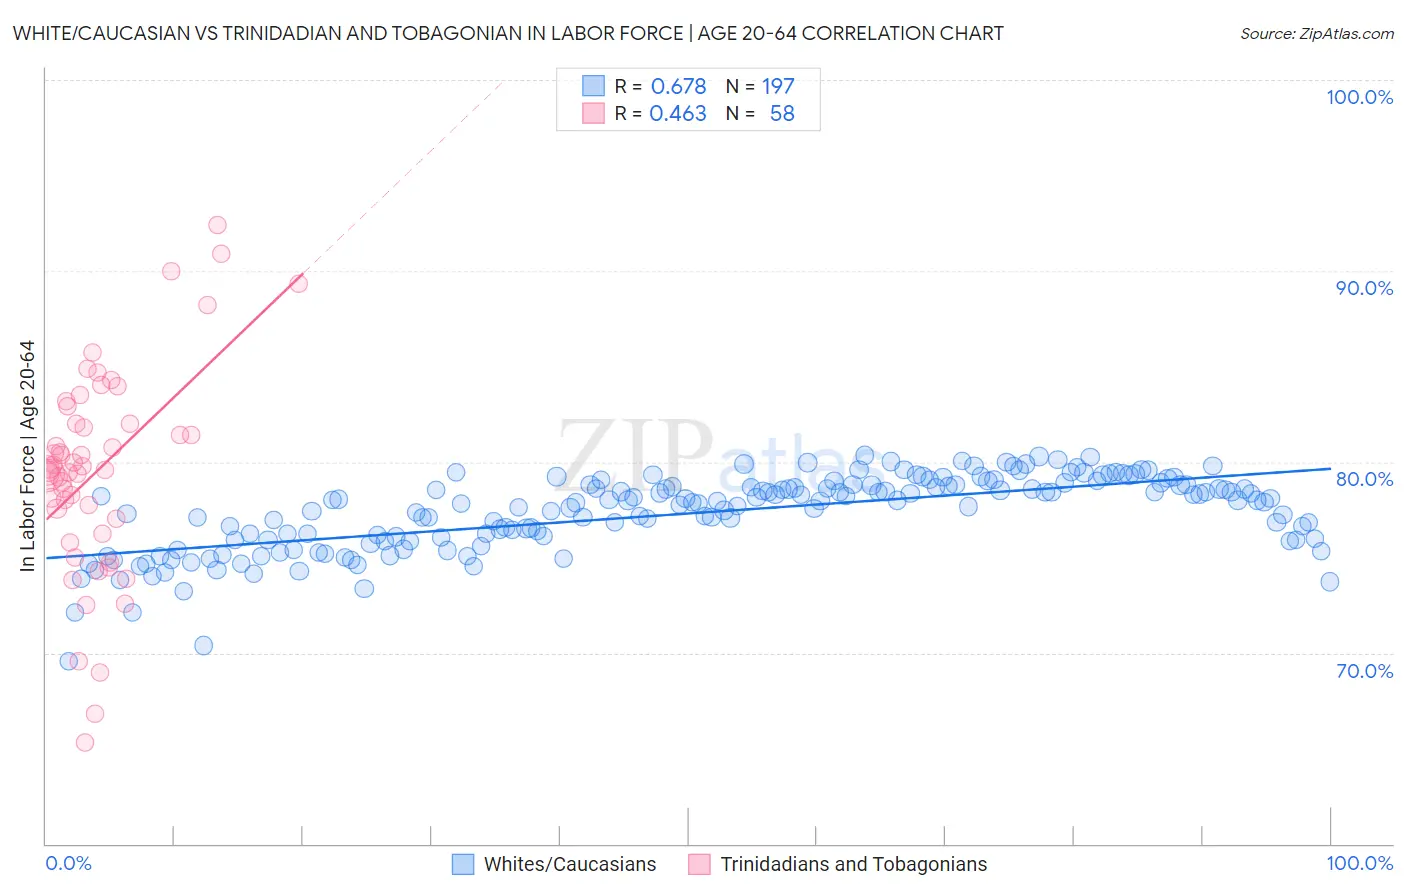 White/Caucasian vs Trinidadian and Tobagonian In Labor Force | Age 20-64